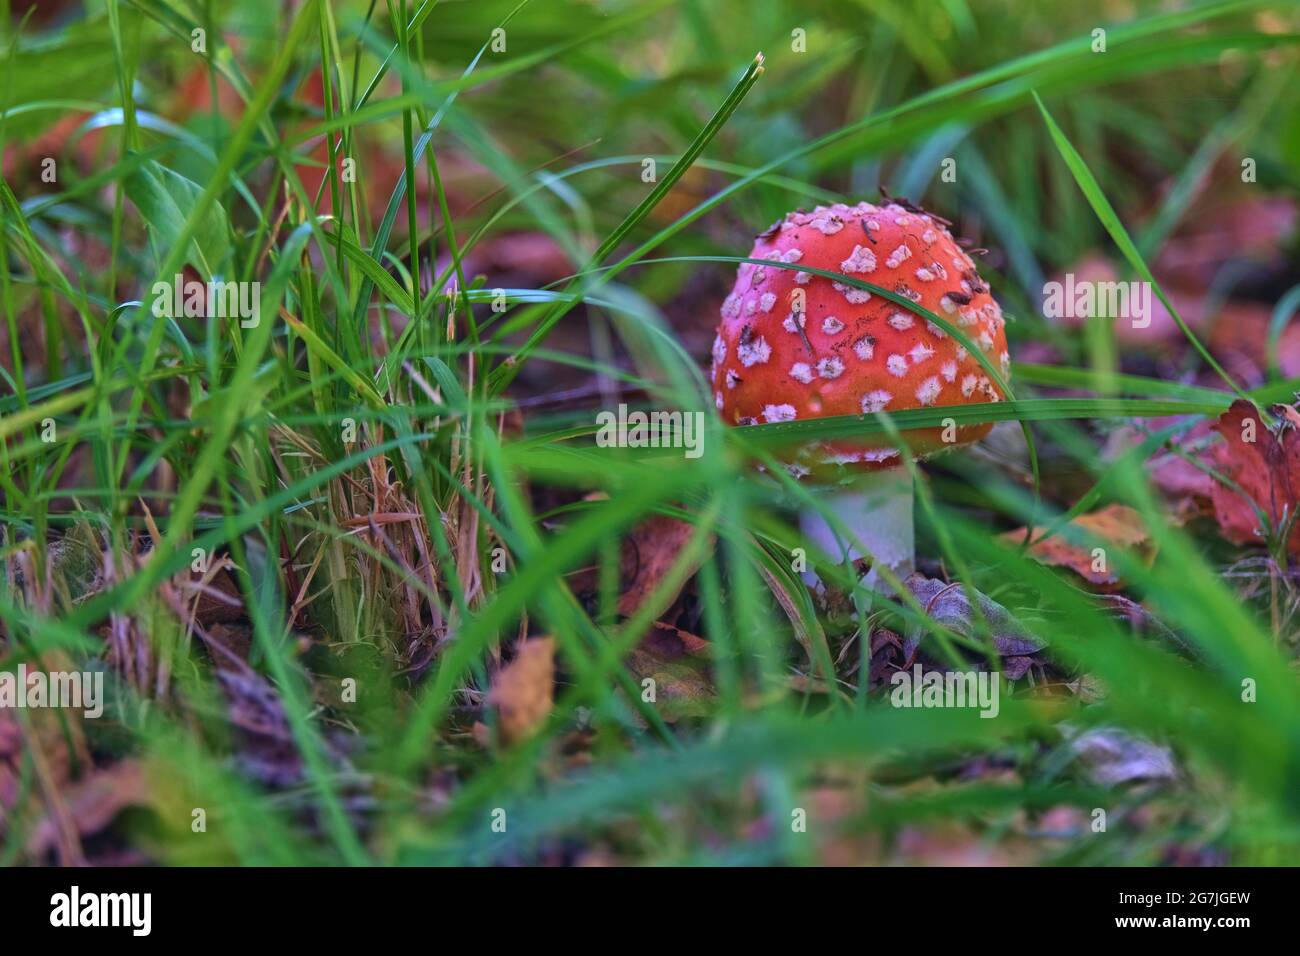 Amanita with a round hat in green grass Stock Photo